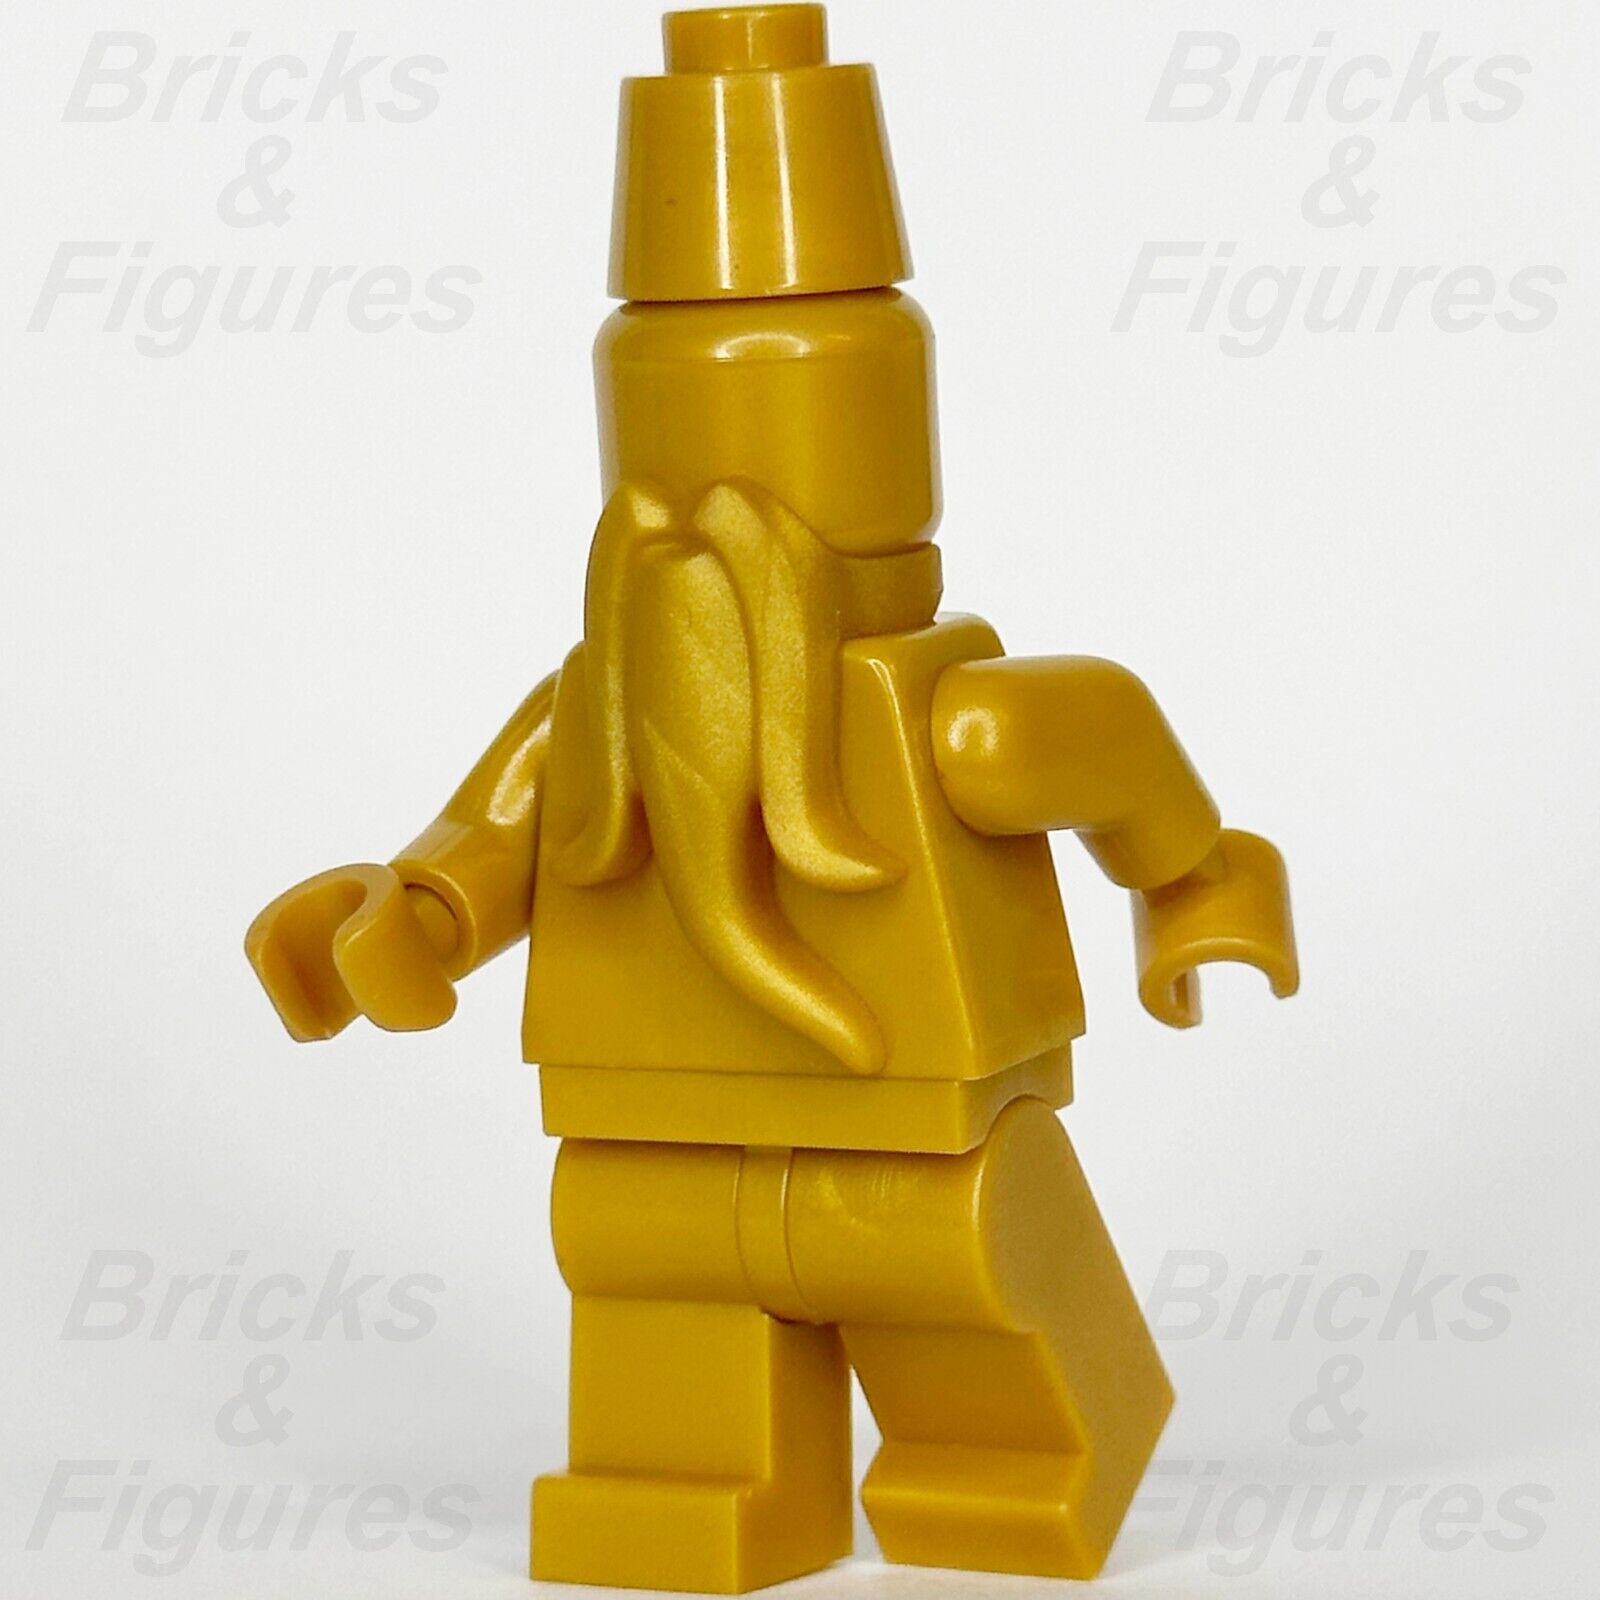 LEGO Harry Potter The Ministry of Magic Statue Minifigure Gold 76403 hp363